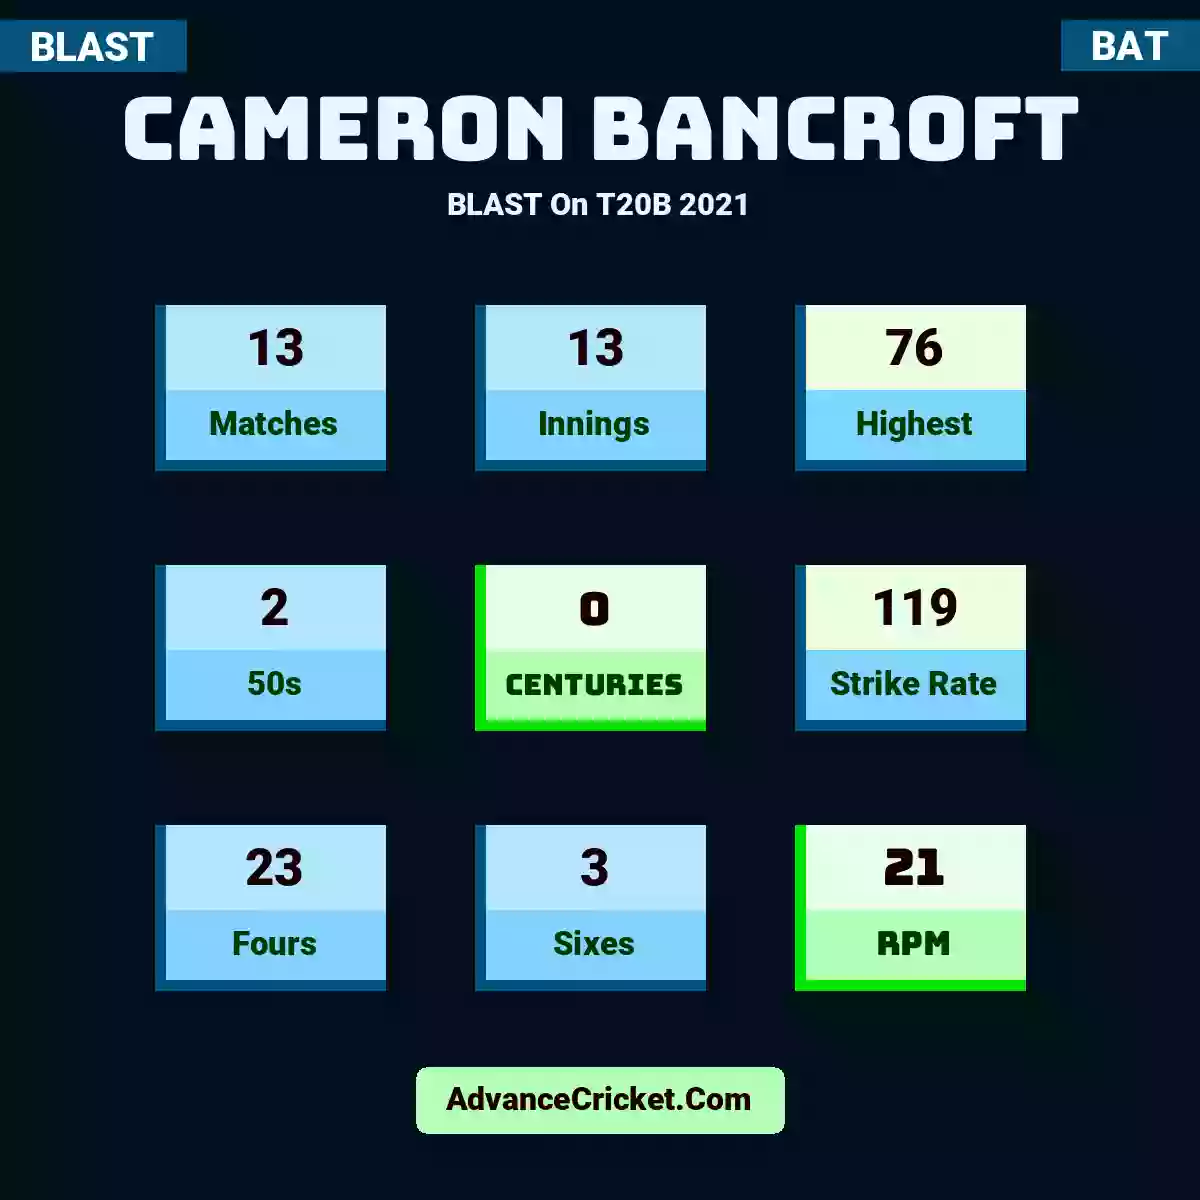 Cameron Bancroft BLAST  On T20B 2021, Cameron Bancroft played 13 matches, scored 76 runs as highest, 2 half-centuries, and 0 centuries, with a strike rate of 119. C.Bancroft hit 23 fours and 3 sixes, with an RPM of 21.